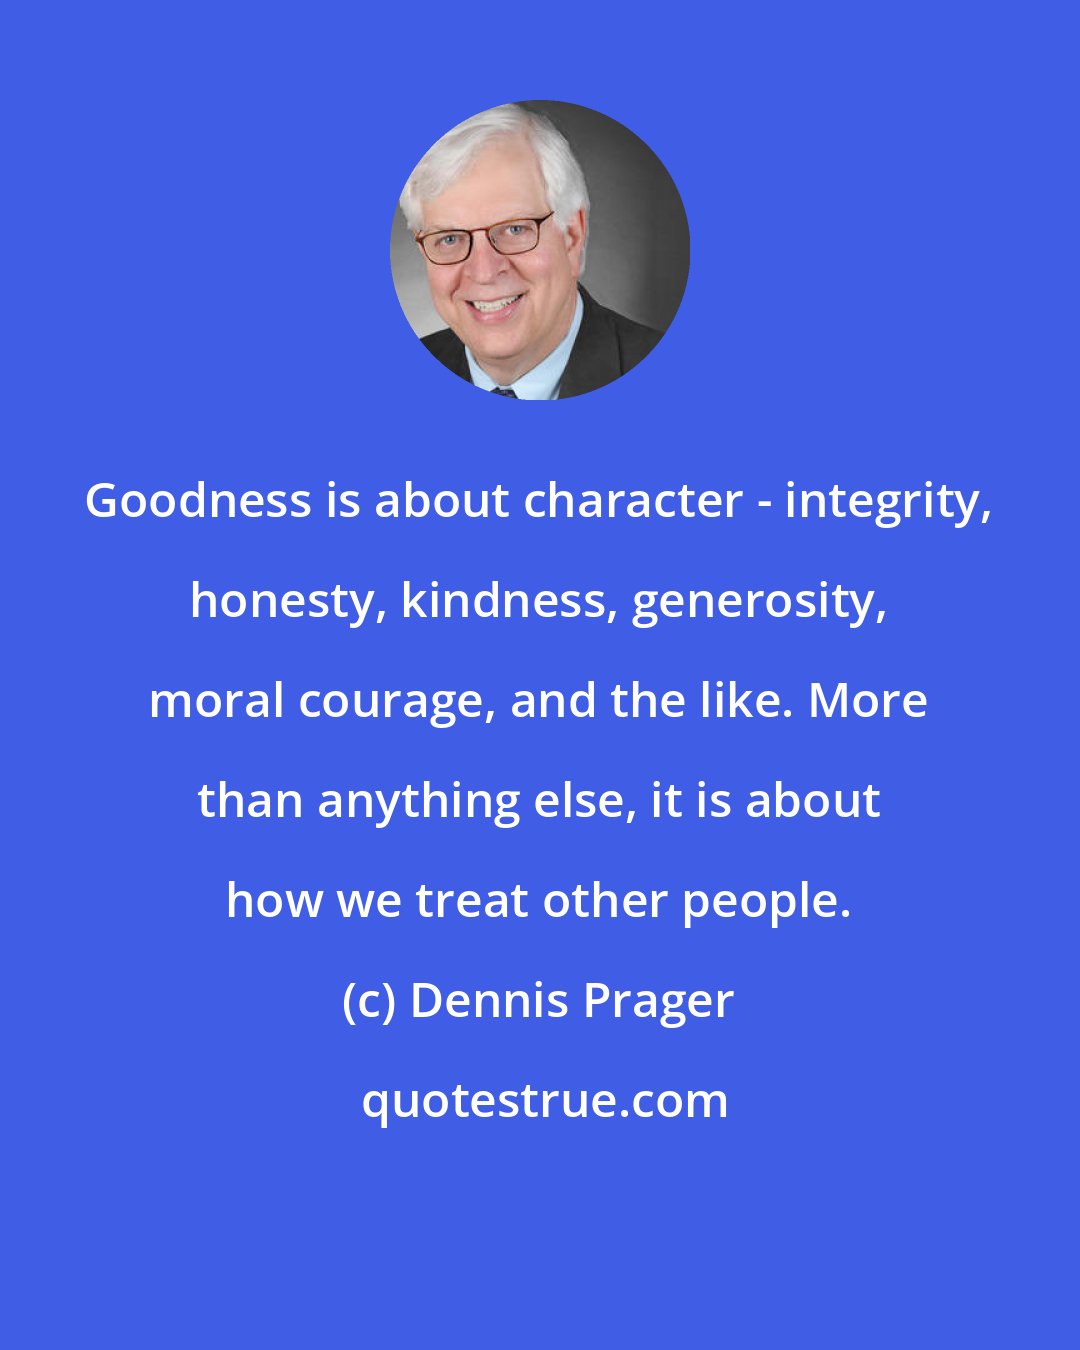 Dennis Prager: Goodness is about character - integrity, honesty, kindness, generosity, moral courage, and the like. More than anything else, it is about how we treat other people.